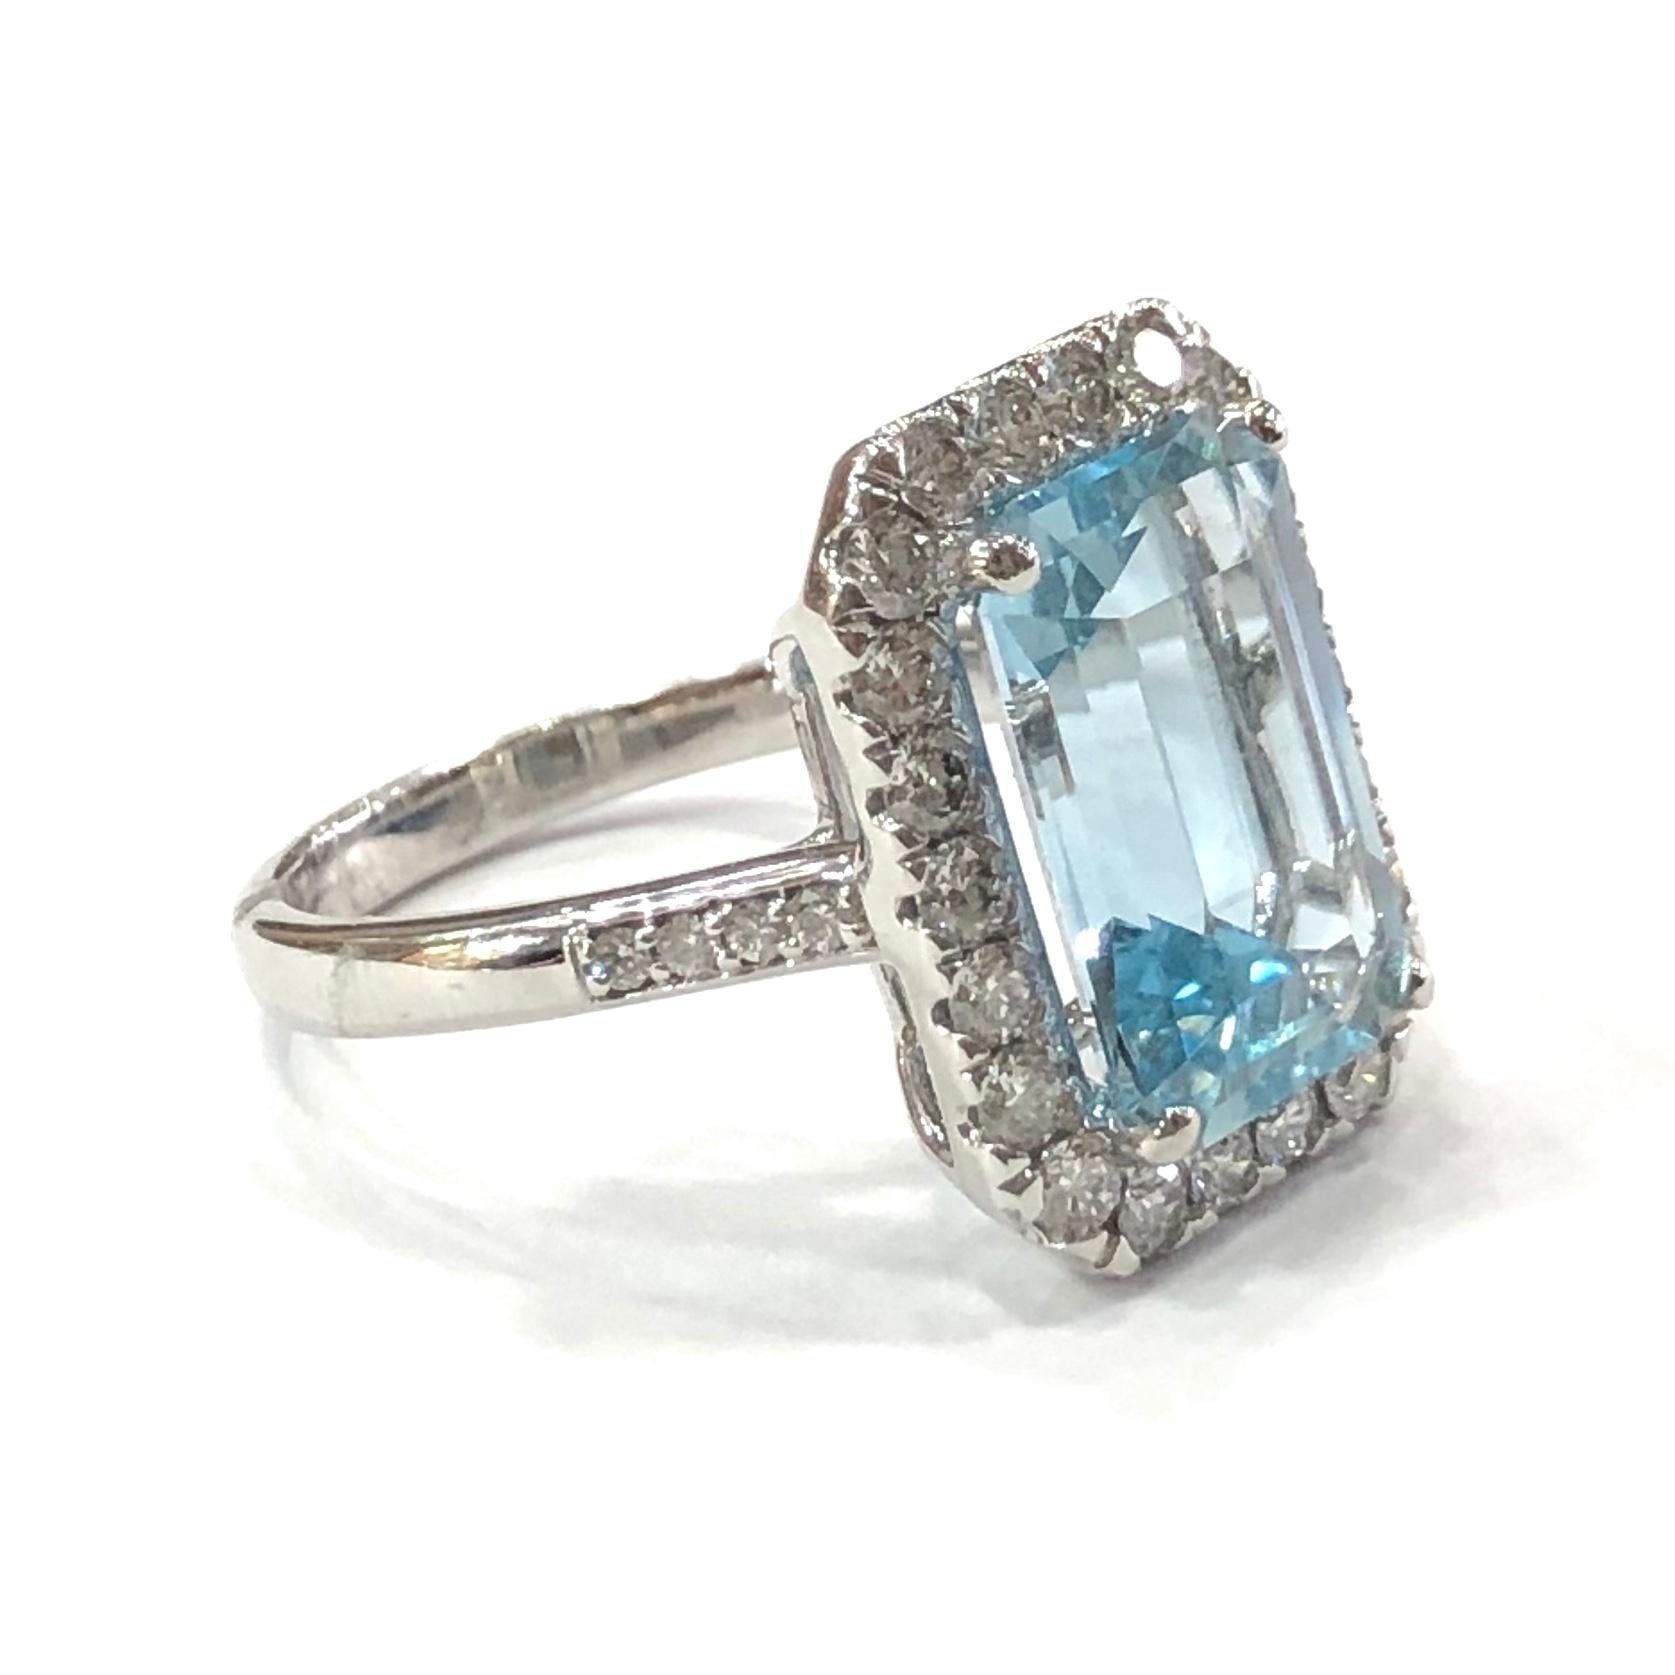 18ct White Gold Aquamarine and Diamond Cluster Ring. Set with a large 14x10mm central emerald cut Aquamarine set in a four claw setting. Surrounded by 22 round brilliant cut Diamonds and 8 round brilliant cut diamonds set on the shoulders.
With a